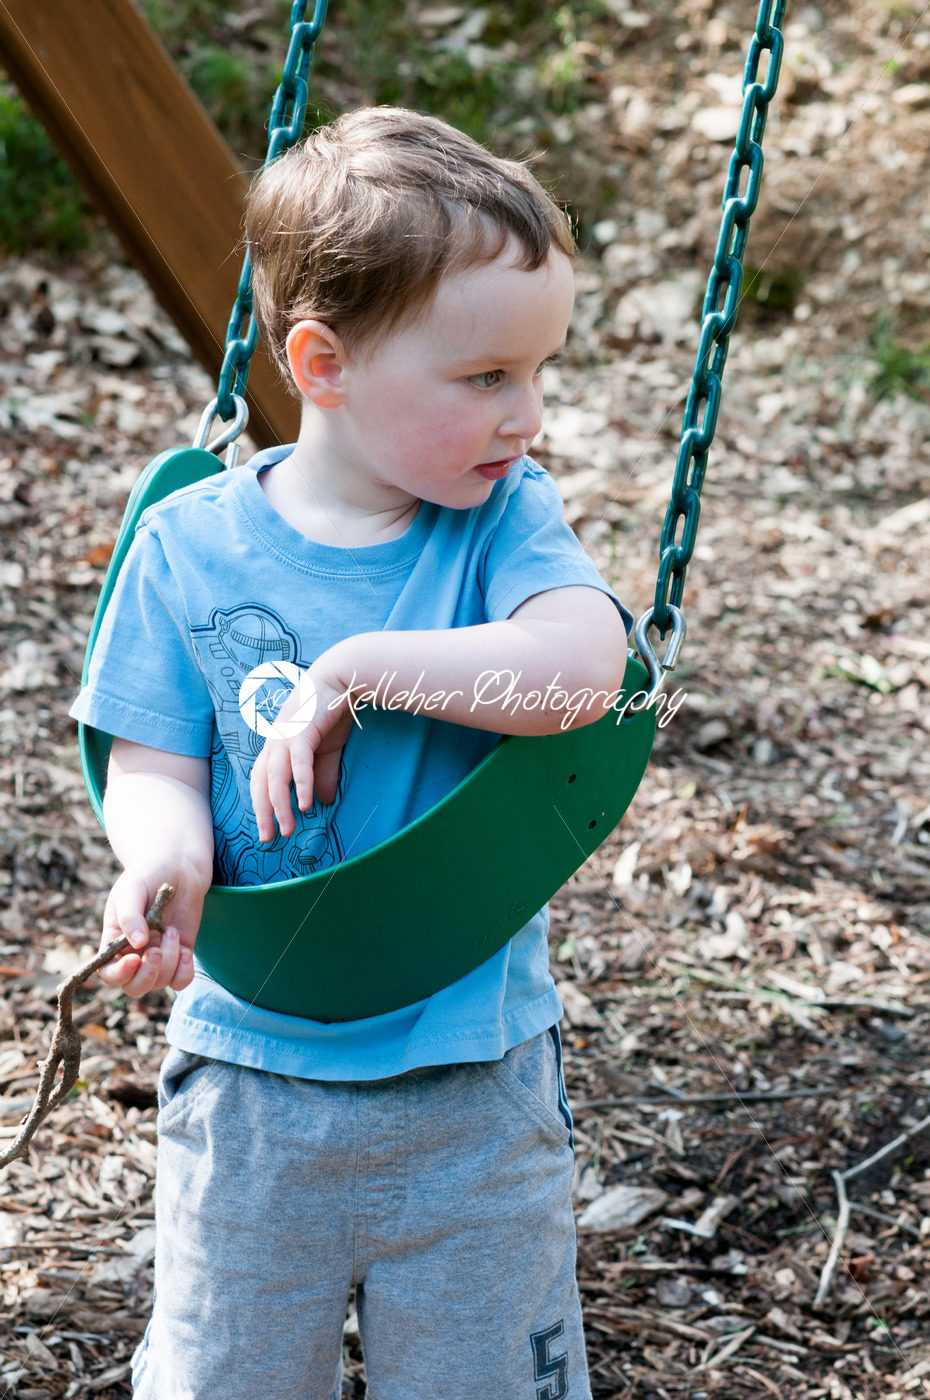 Young boy having fun on a swing - Kelleher Photography Store